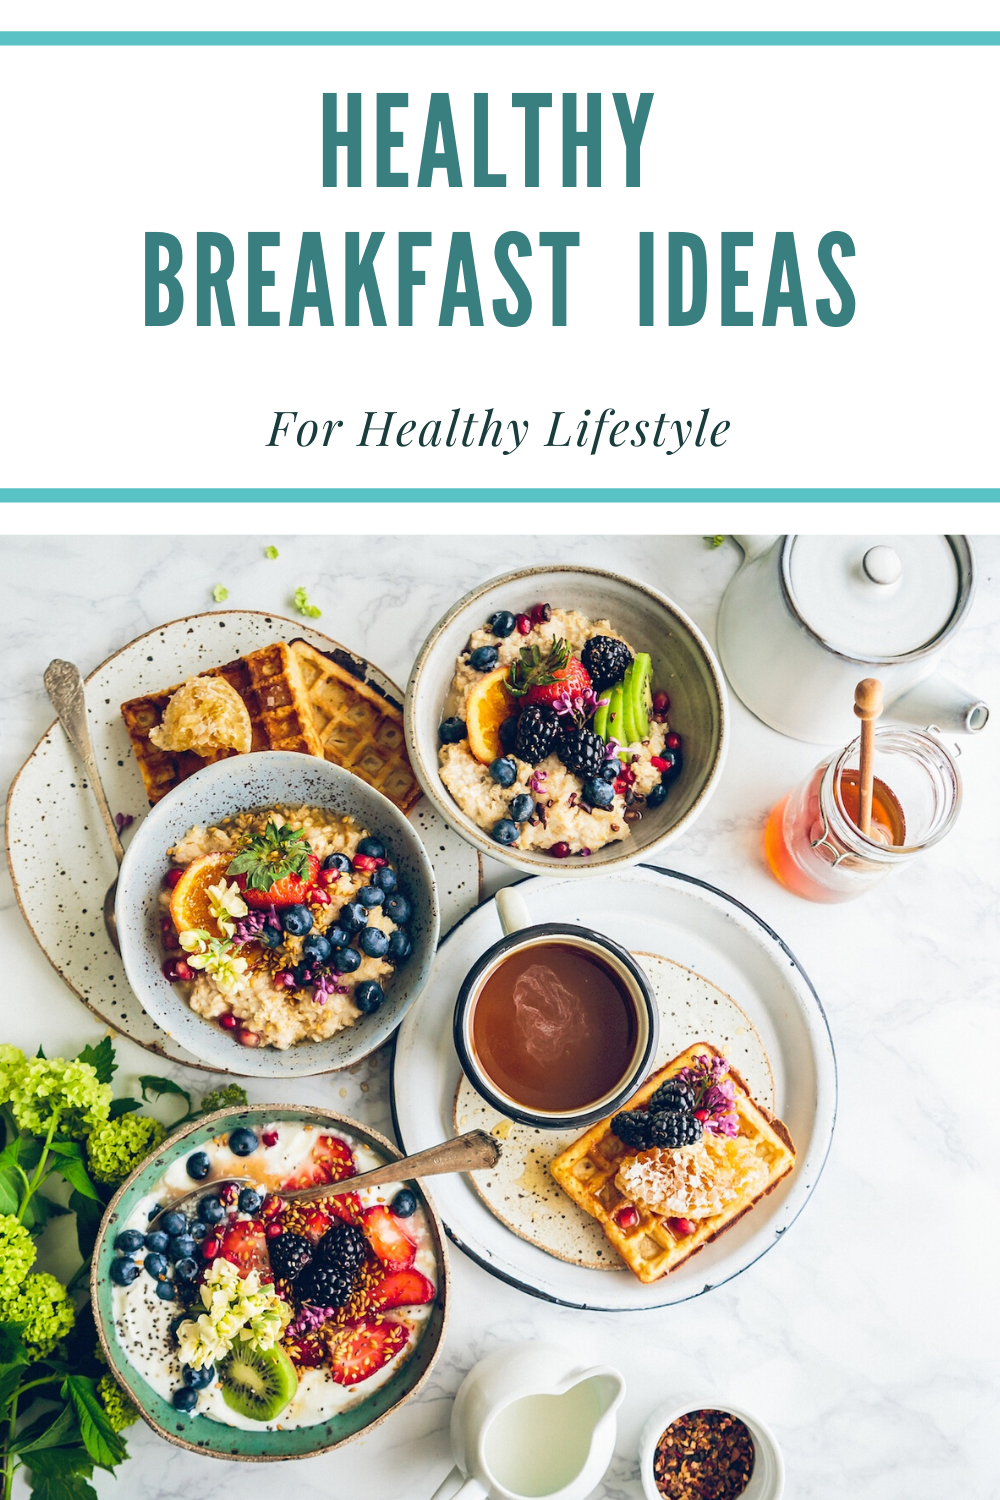 Healthy Food for Breakfast – Meal Ideas - Superfoodsliving.com